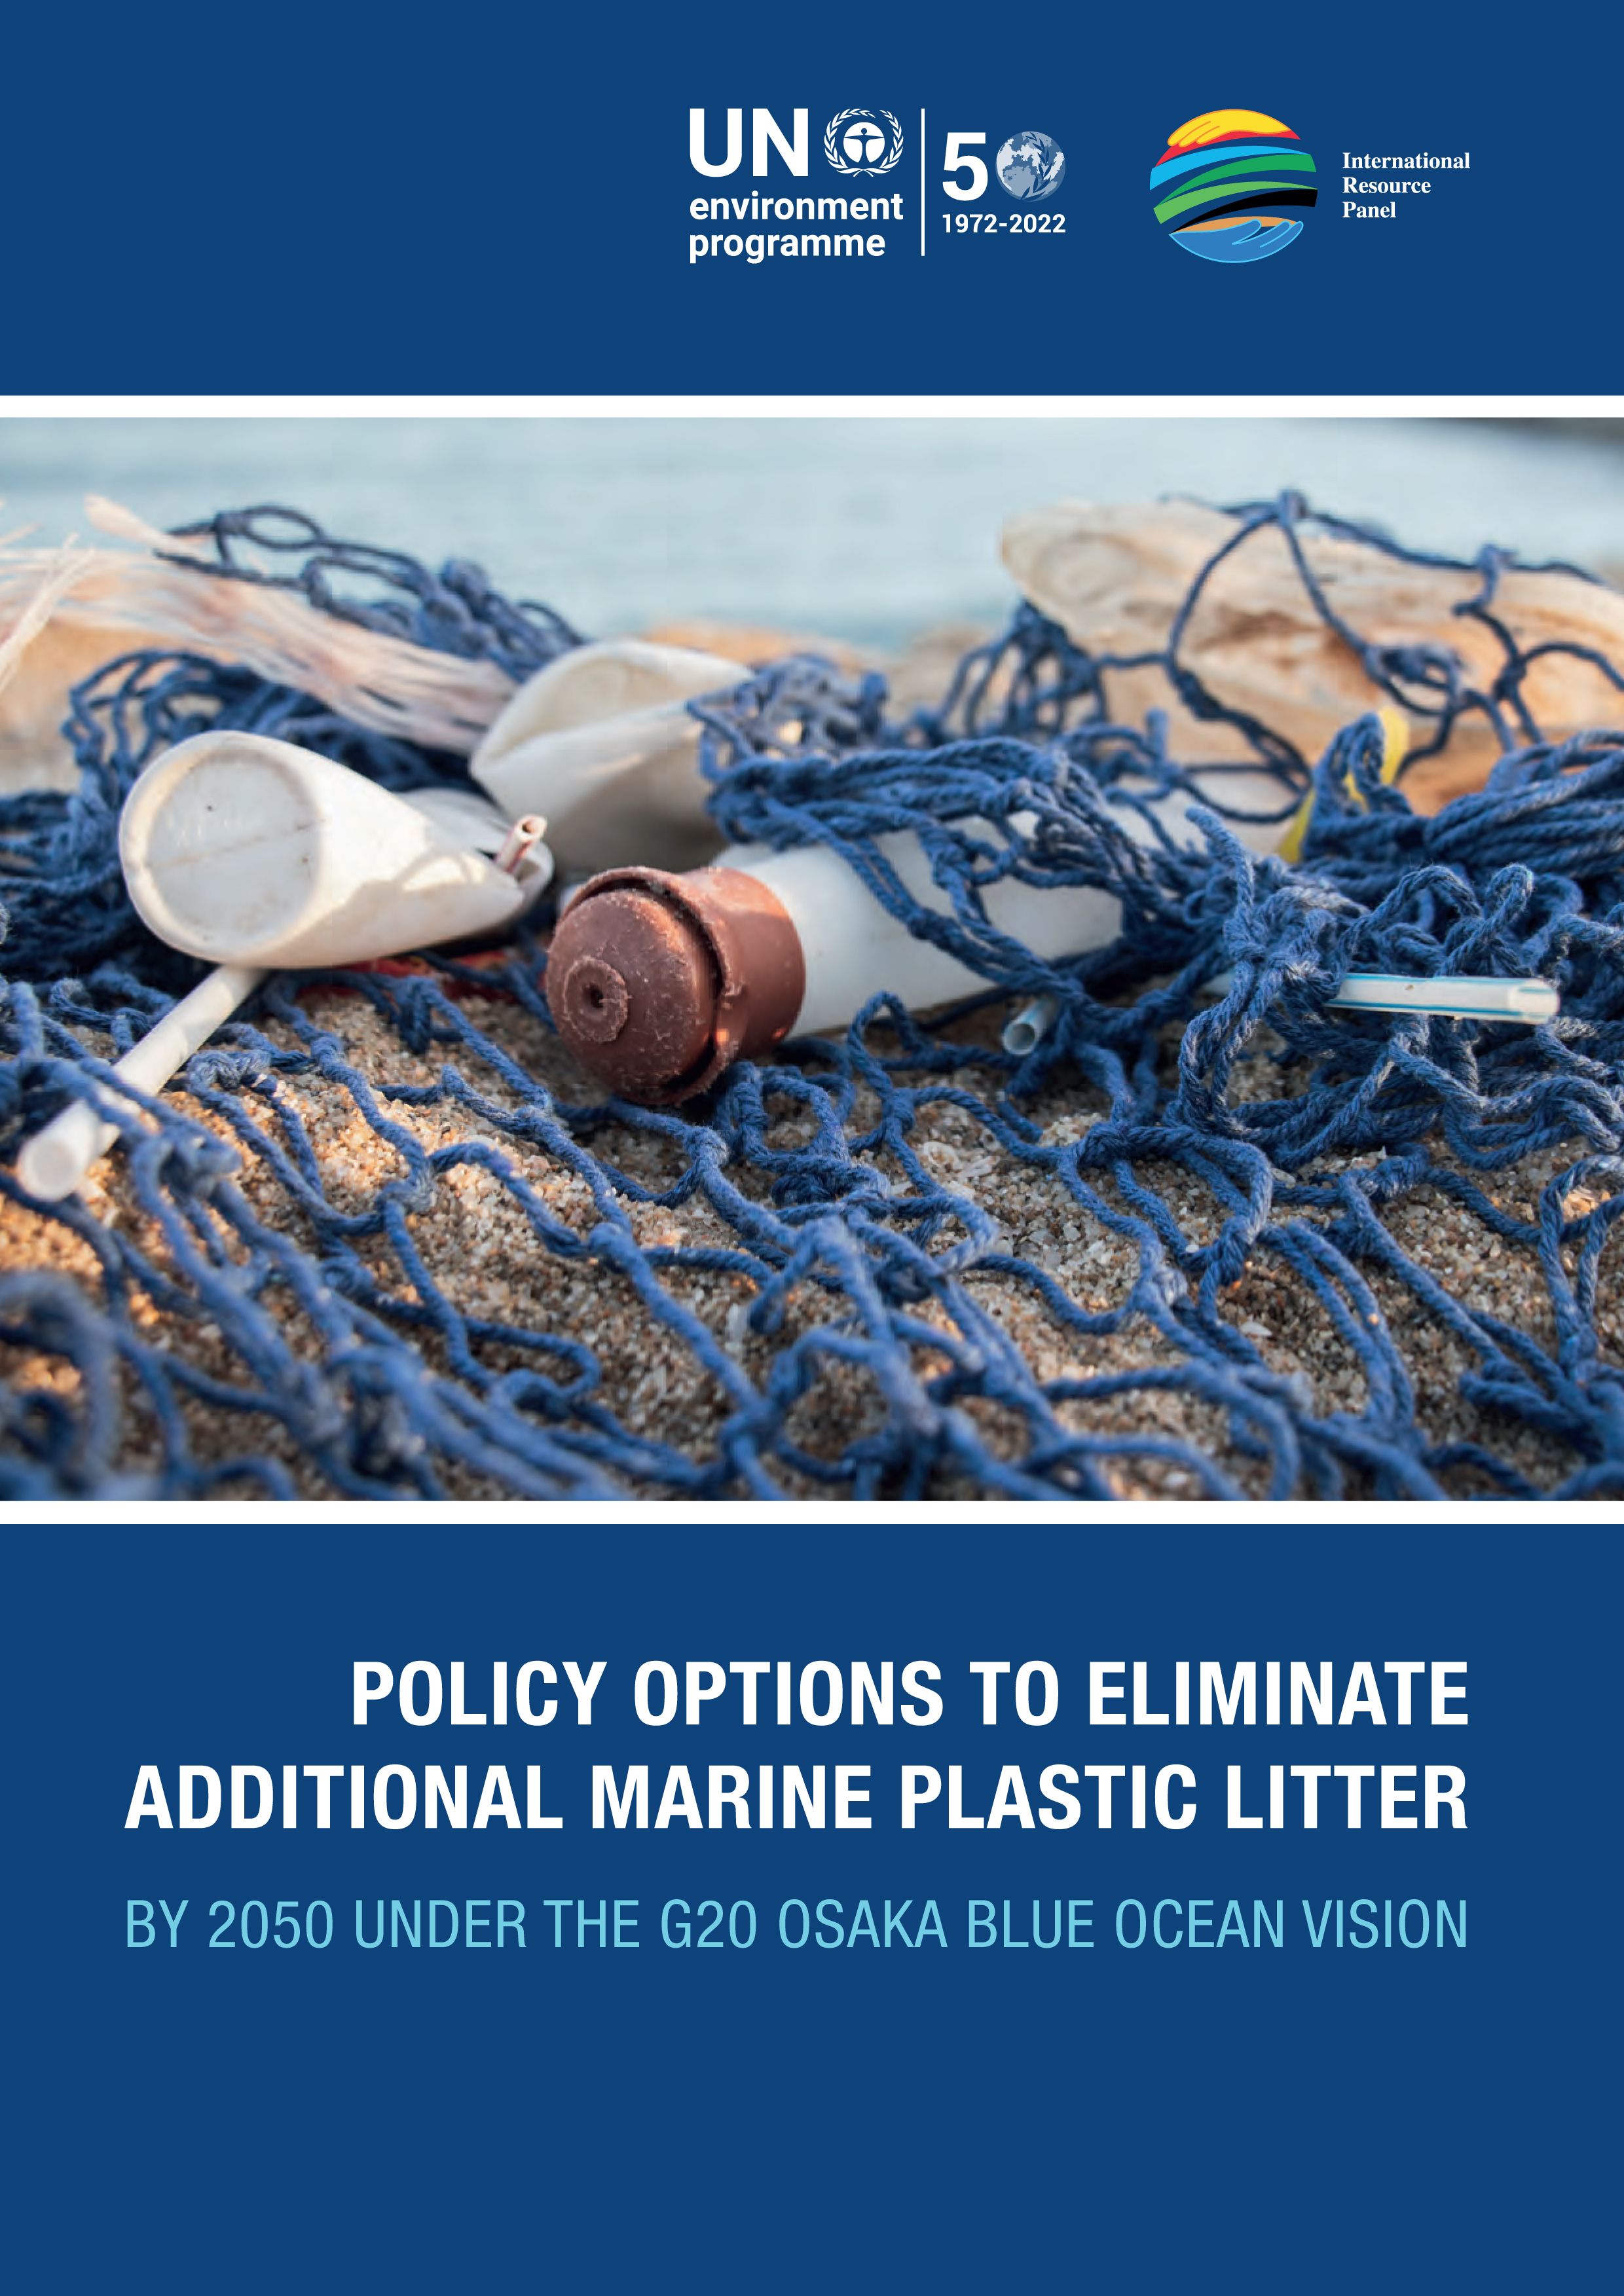 image of Policy Options to Eliminate Additional Marine Plastic Litter by 2050 Under the G20 Osaka Blue Ocean Vision